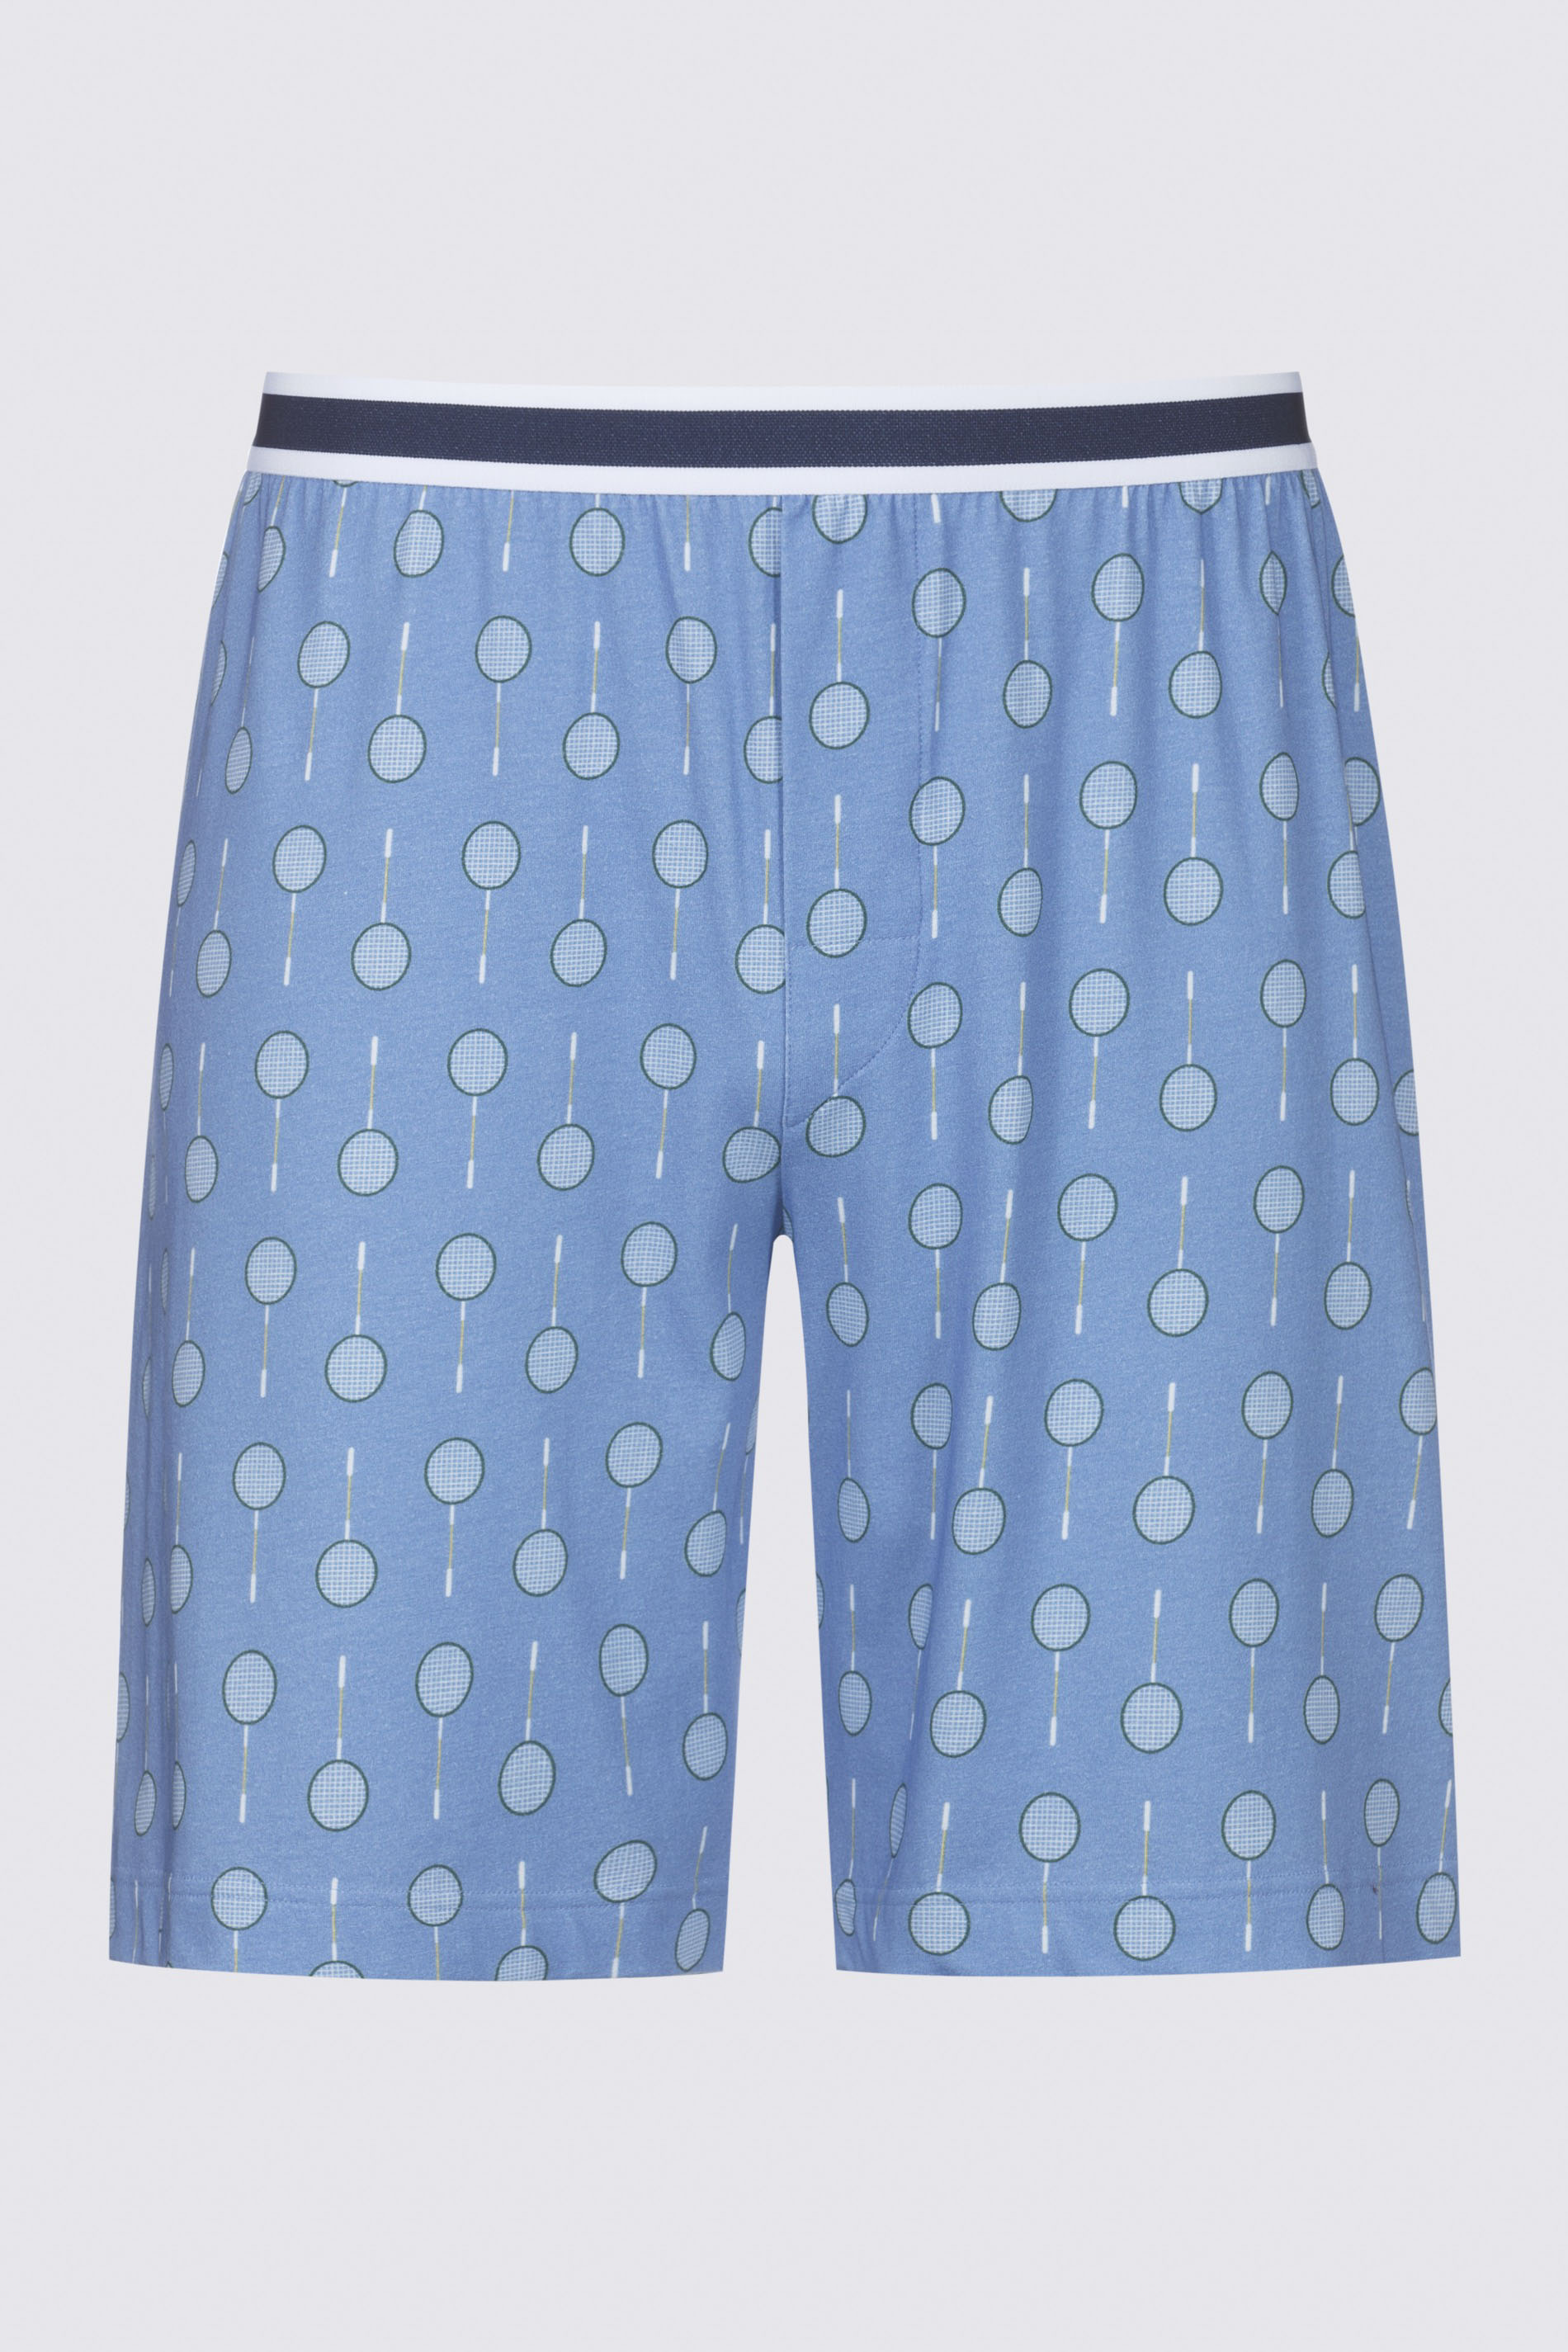 Shorts Serie Racket Uitknippen | mey®